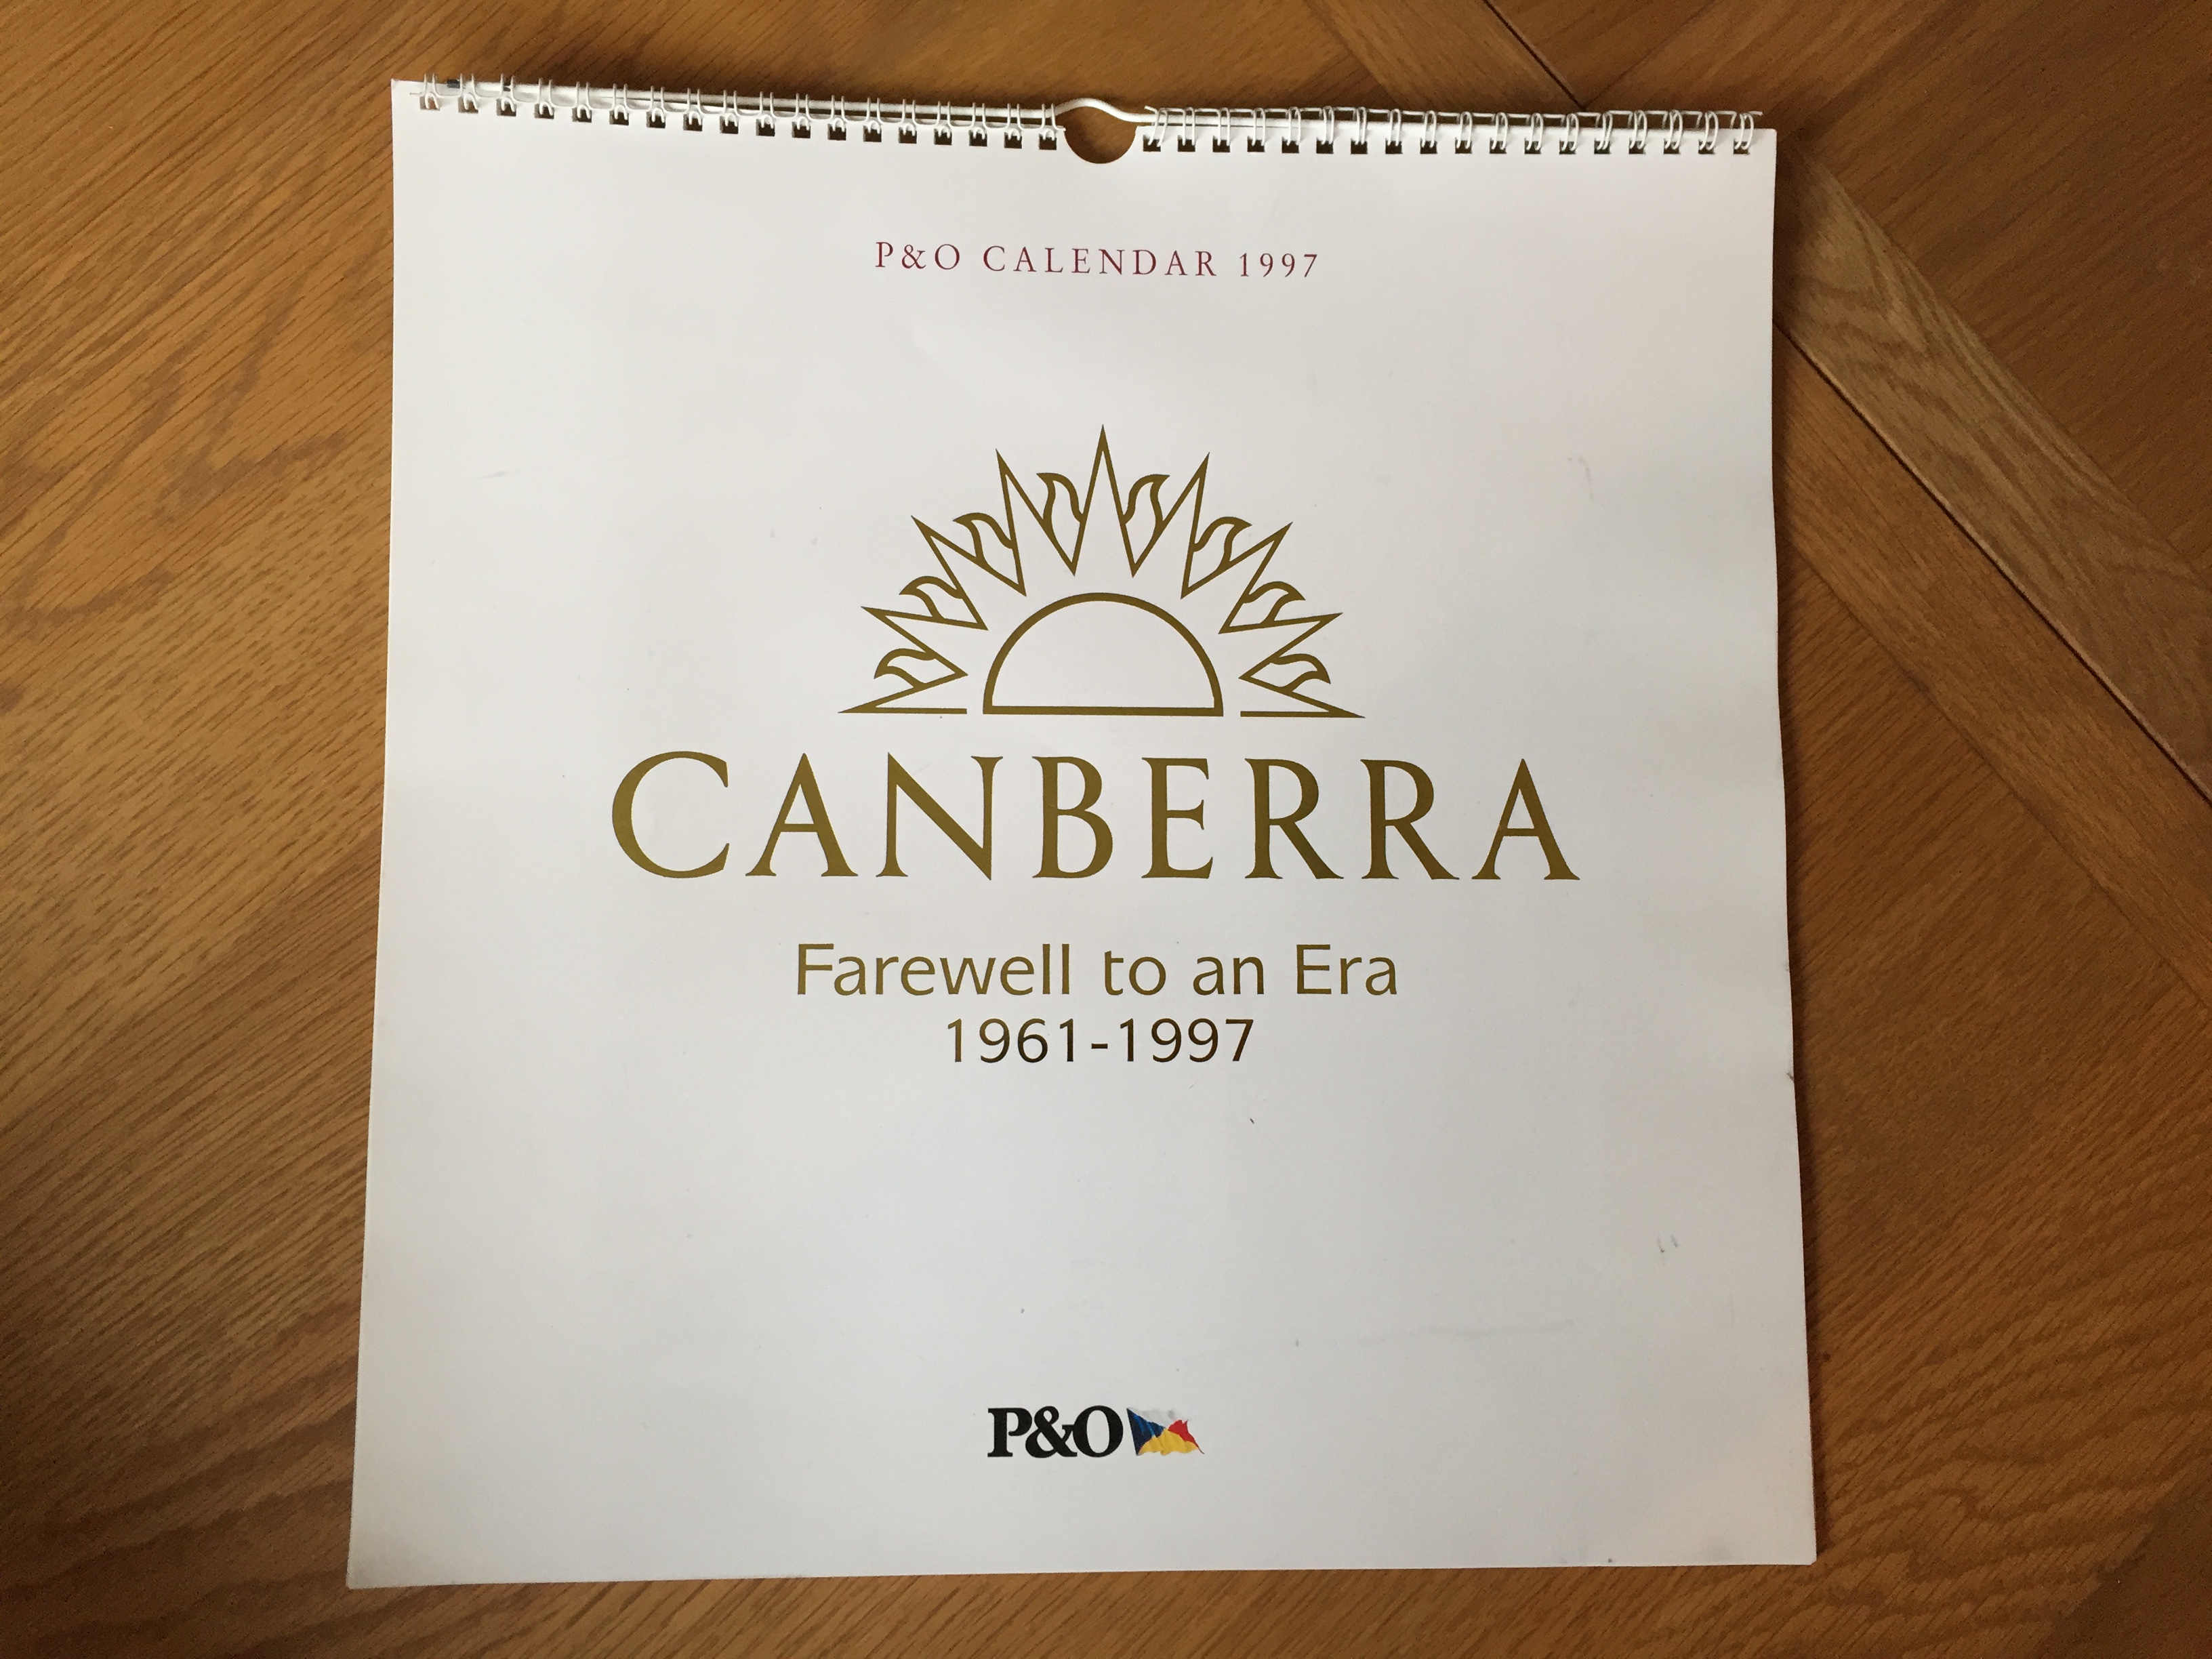 UNUSED CALENDAR FROM THE LAST VOYAGE OF THE CANBERRA